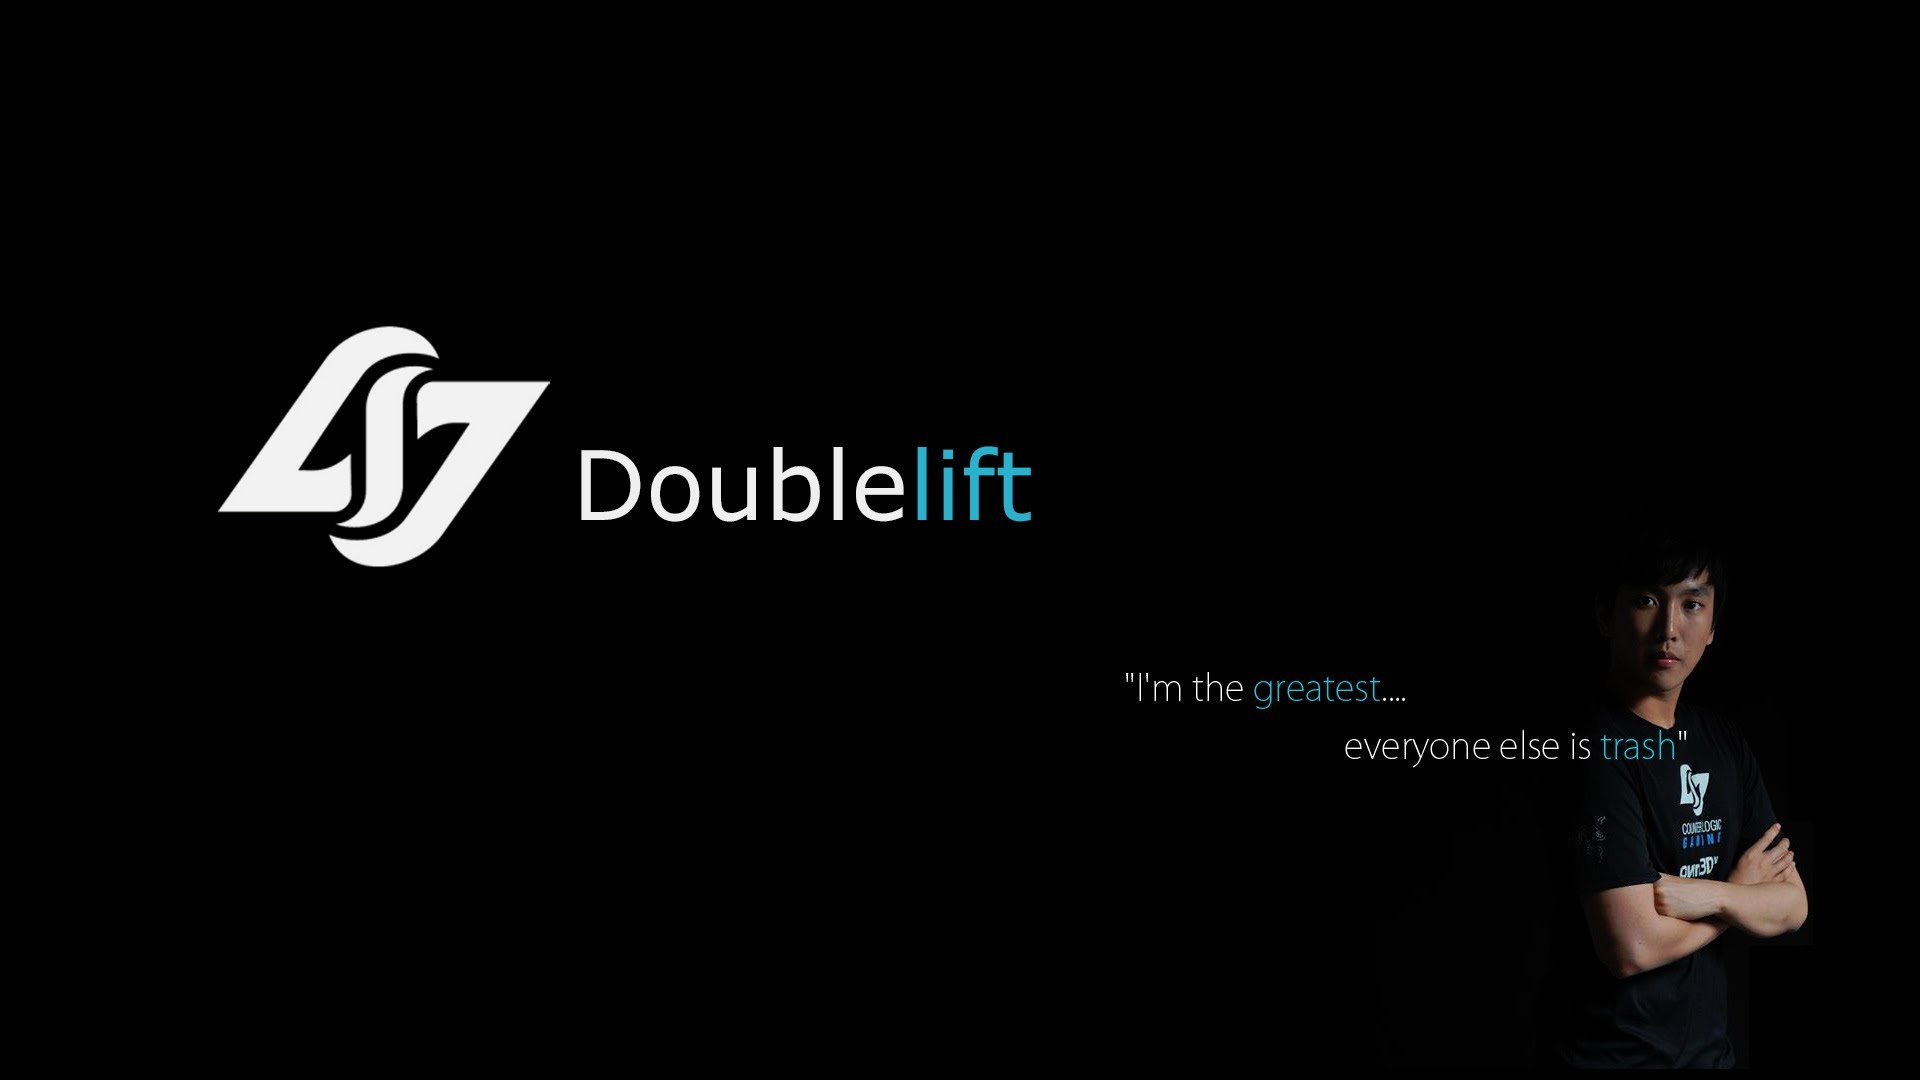 CLG Doublelift   Montage   Counter Logic Gaming